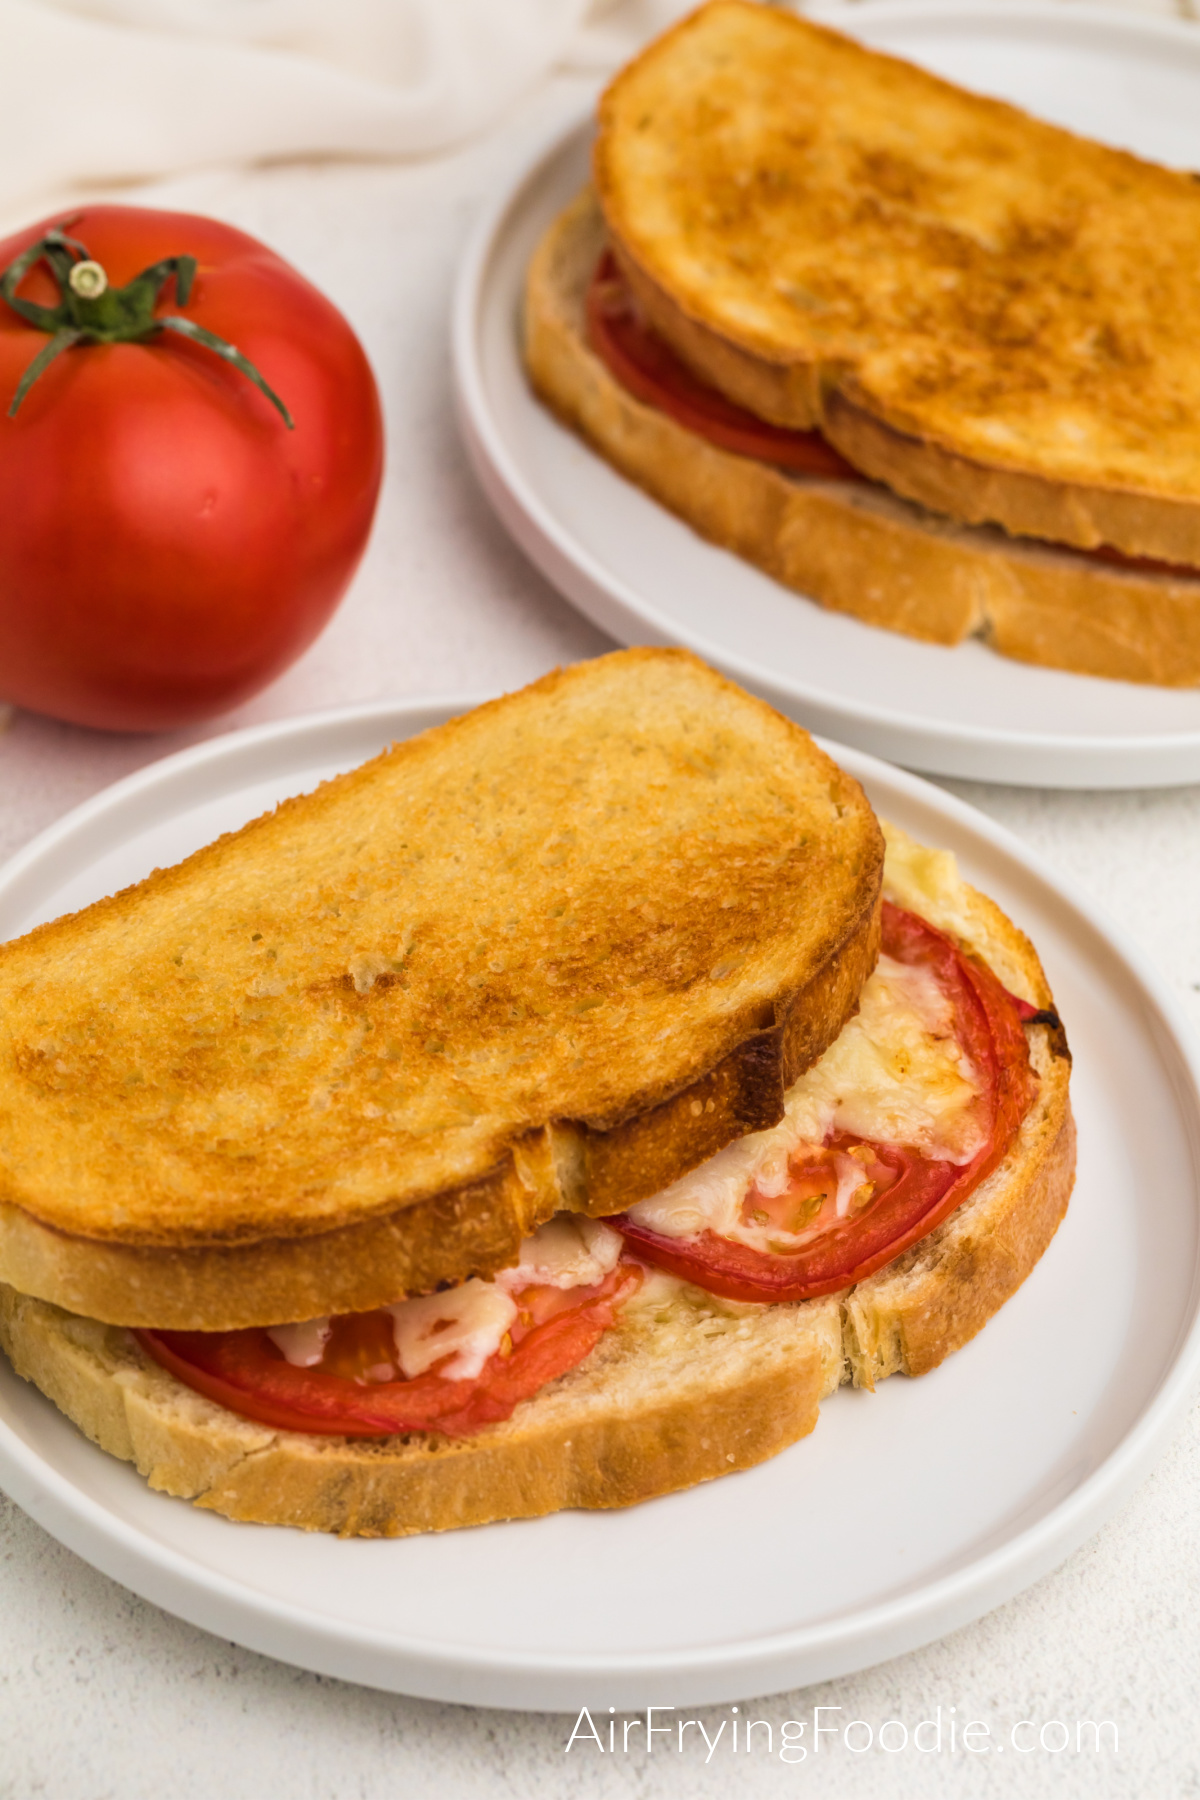 Tomato grilled cheese made in the air fryer and served on a white plate.